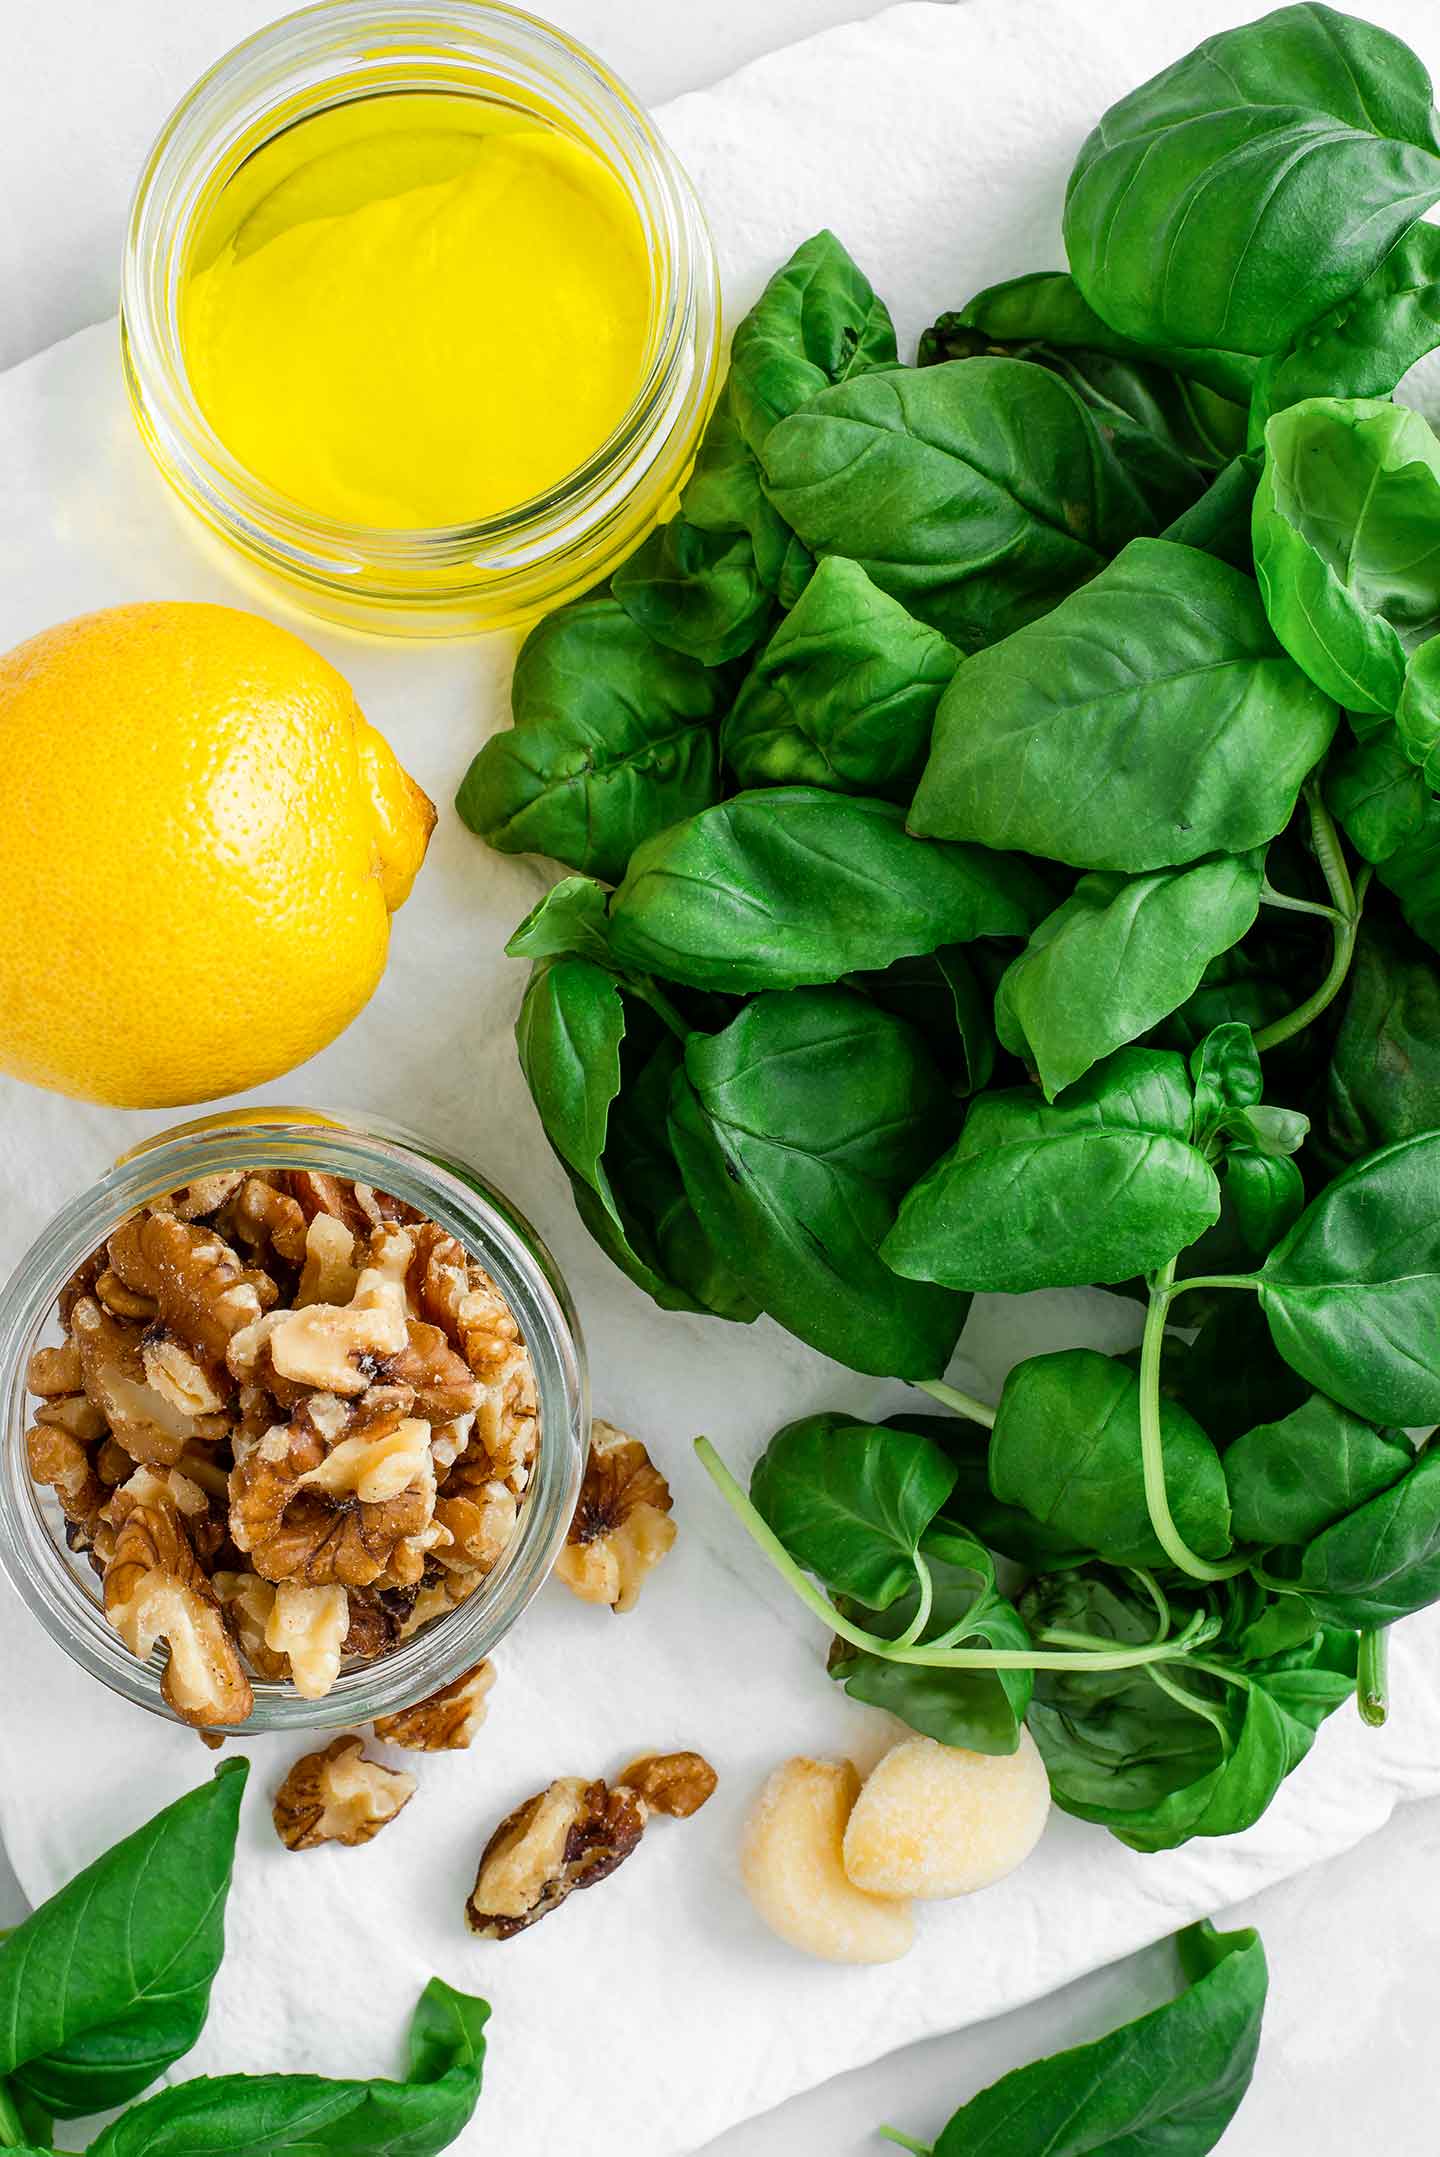 Top down view of basil leaves, walnuts, lemon juice, garlic, and olive oil.